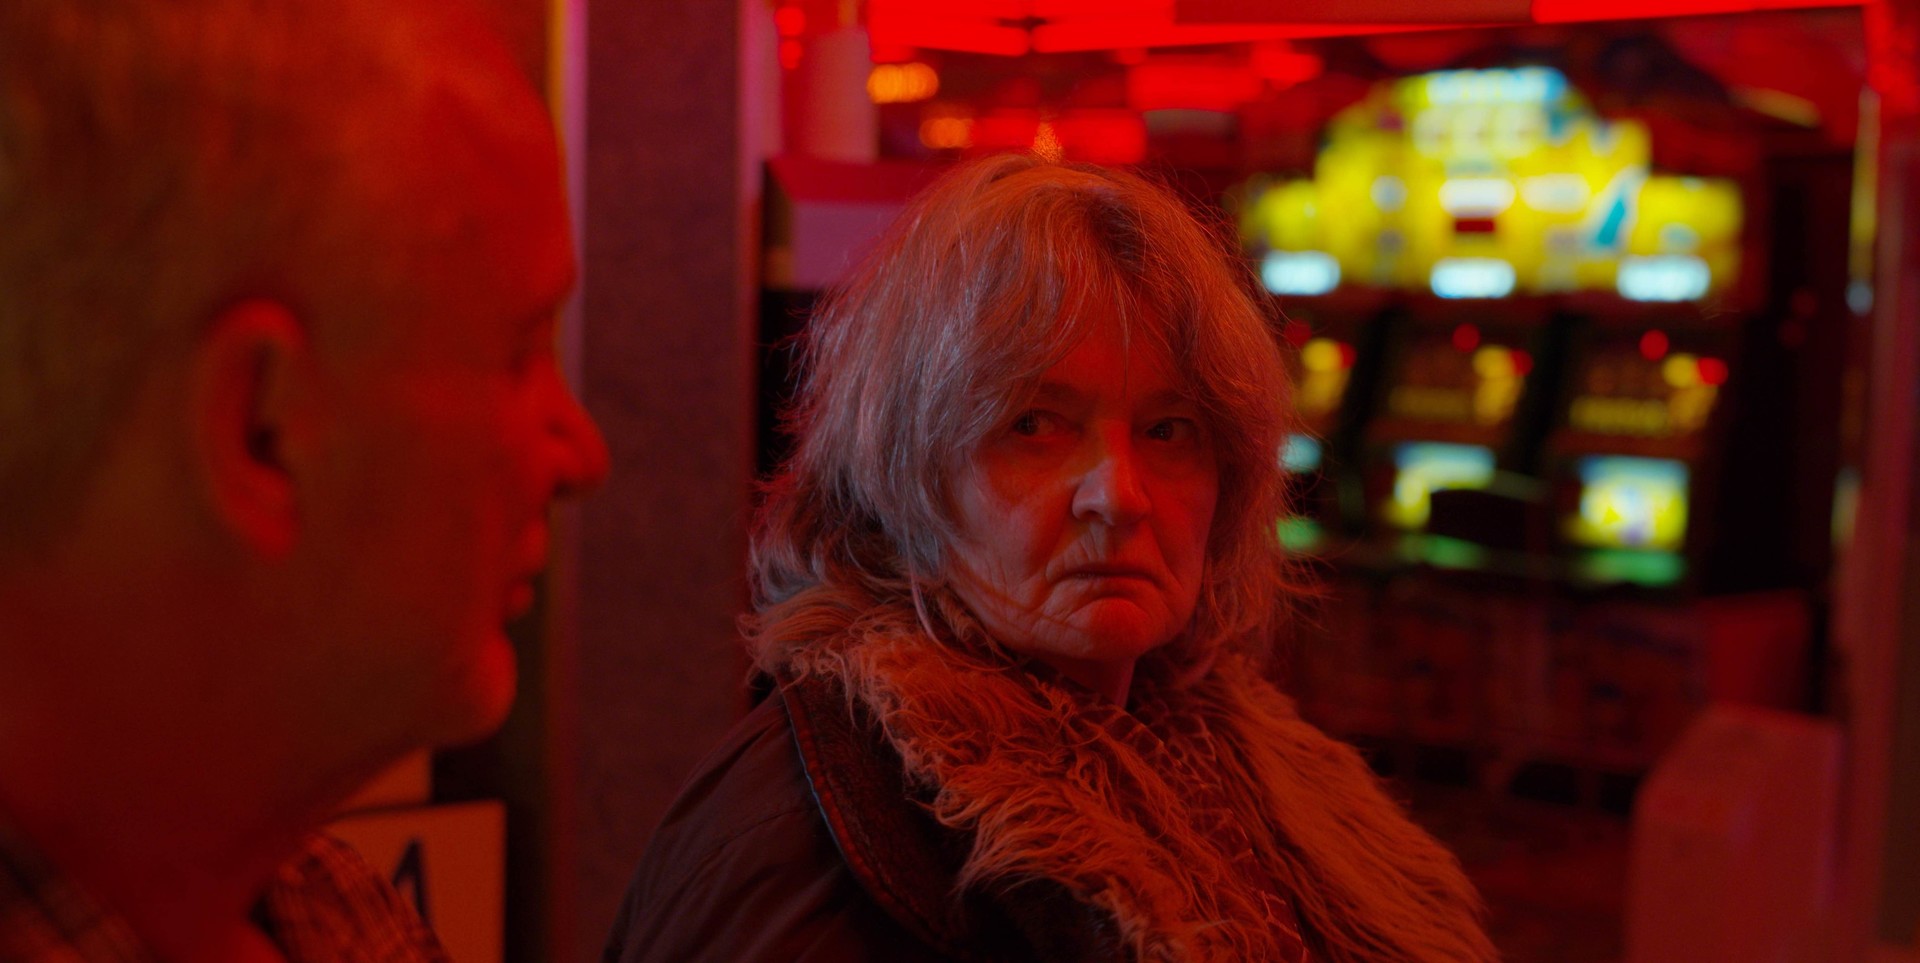 An old woman scowls at a man. They're covered in red light.